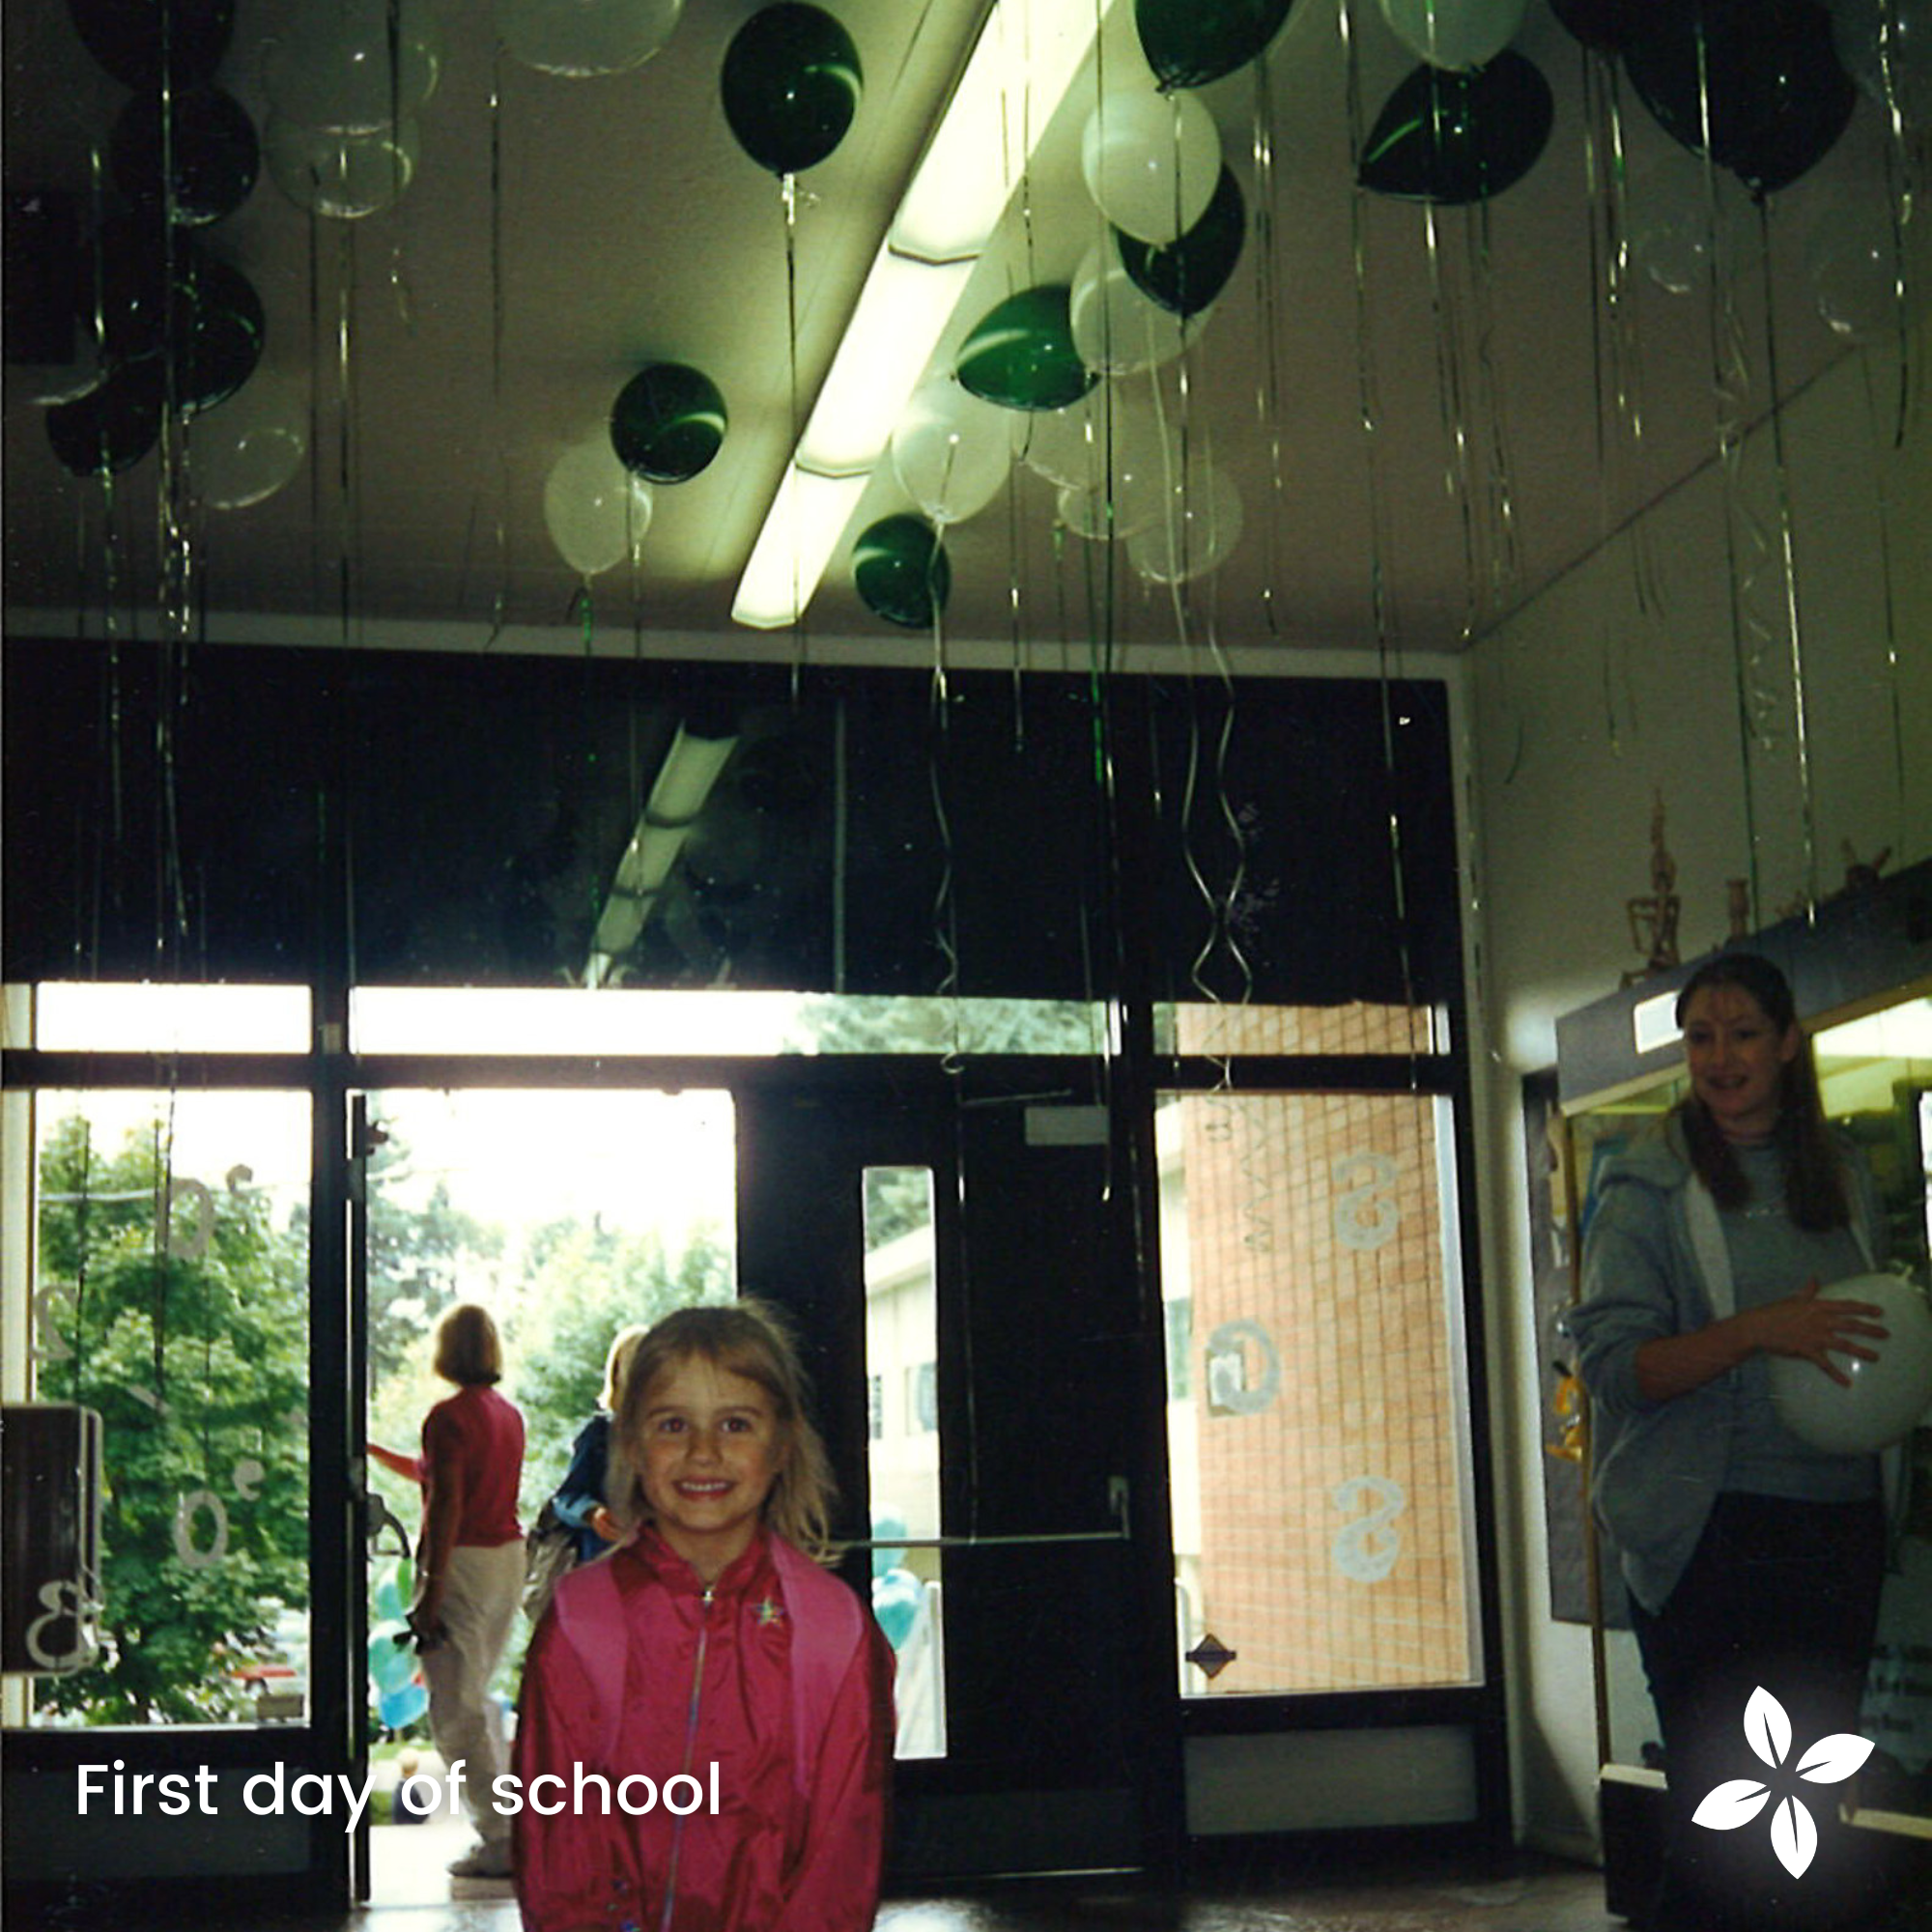 First day of school with balloons